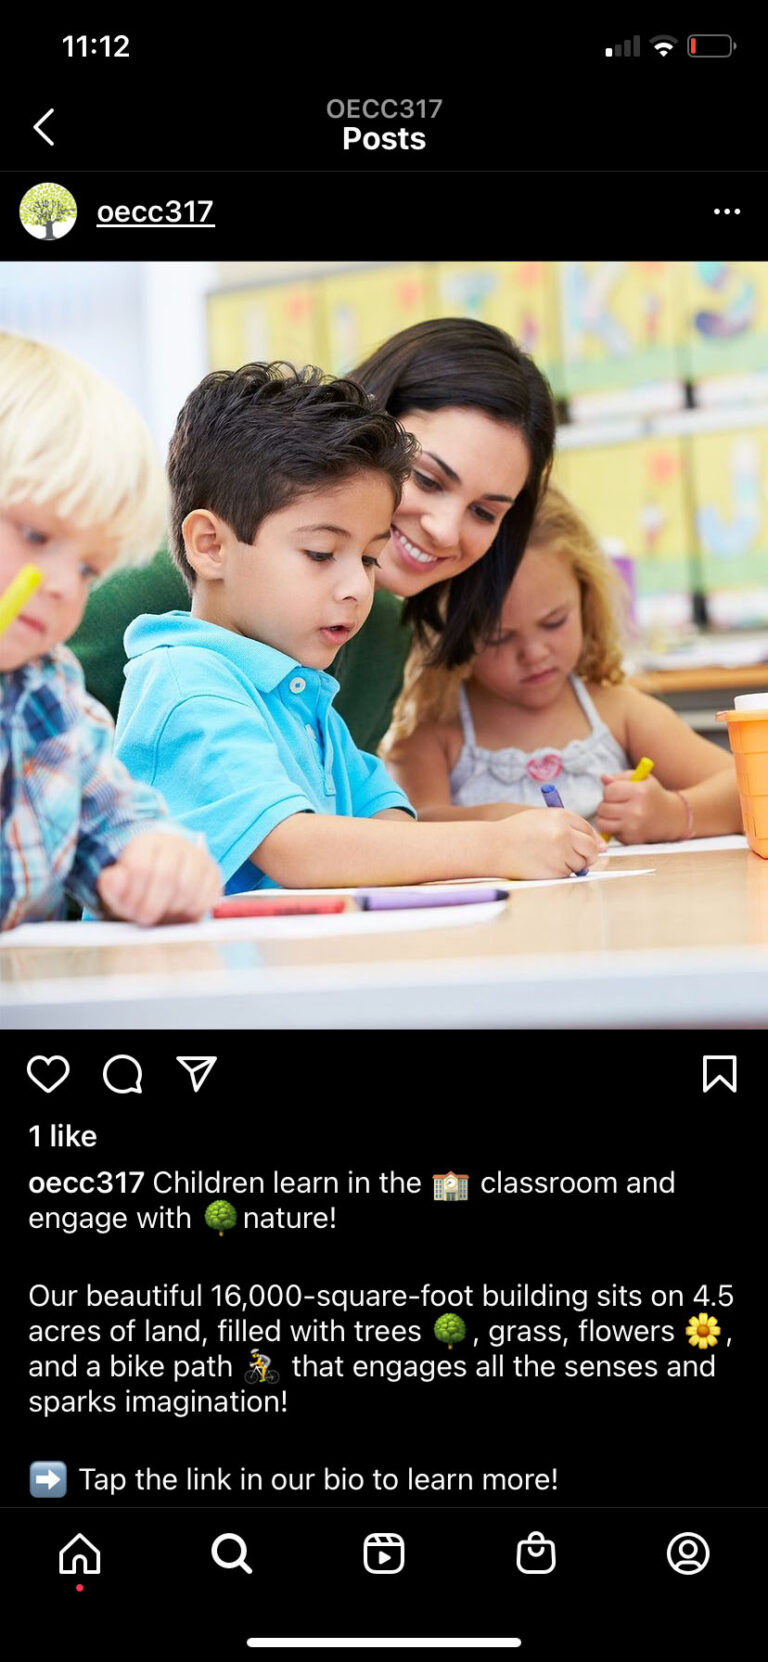 OECC instagram post screenshot for classroom and nature